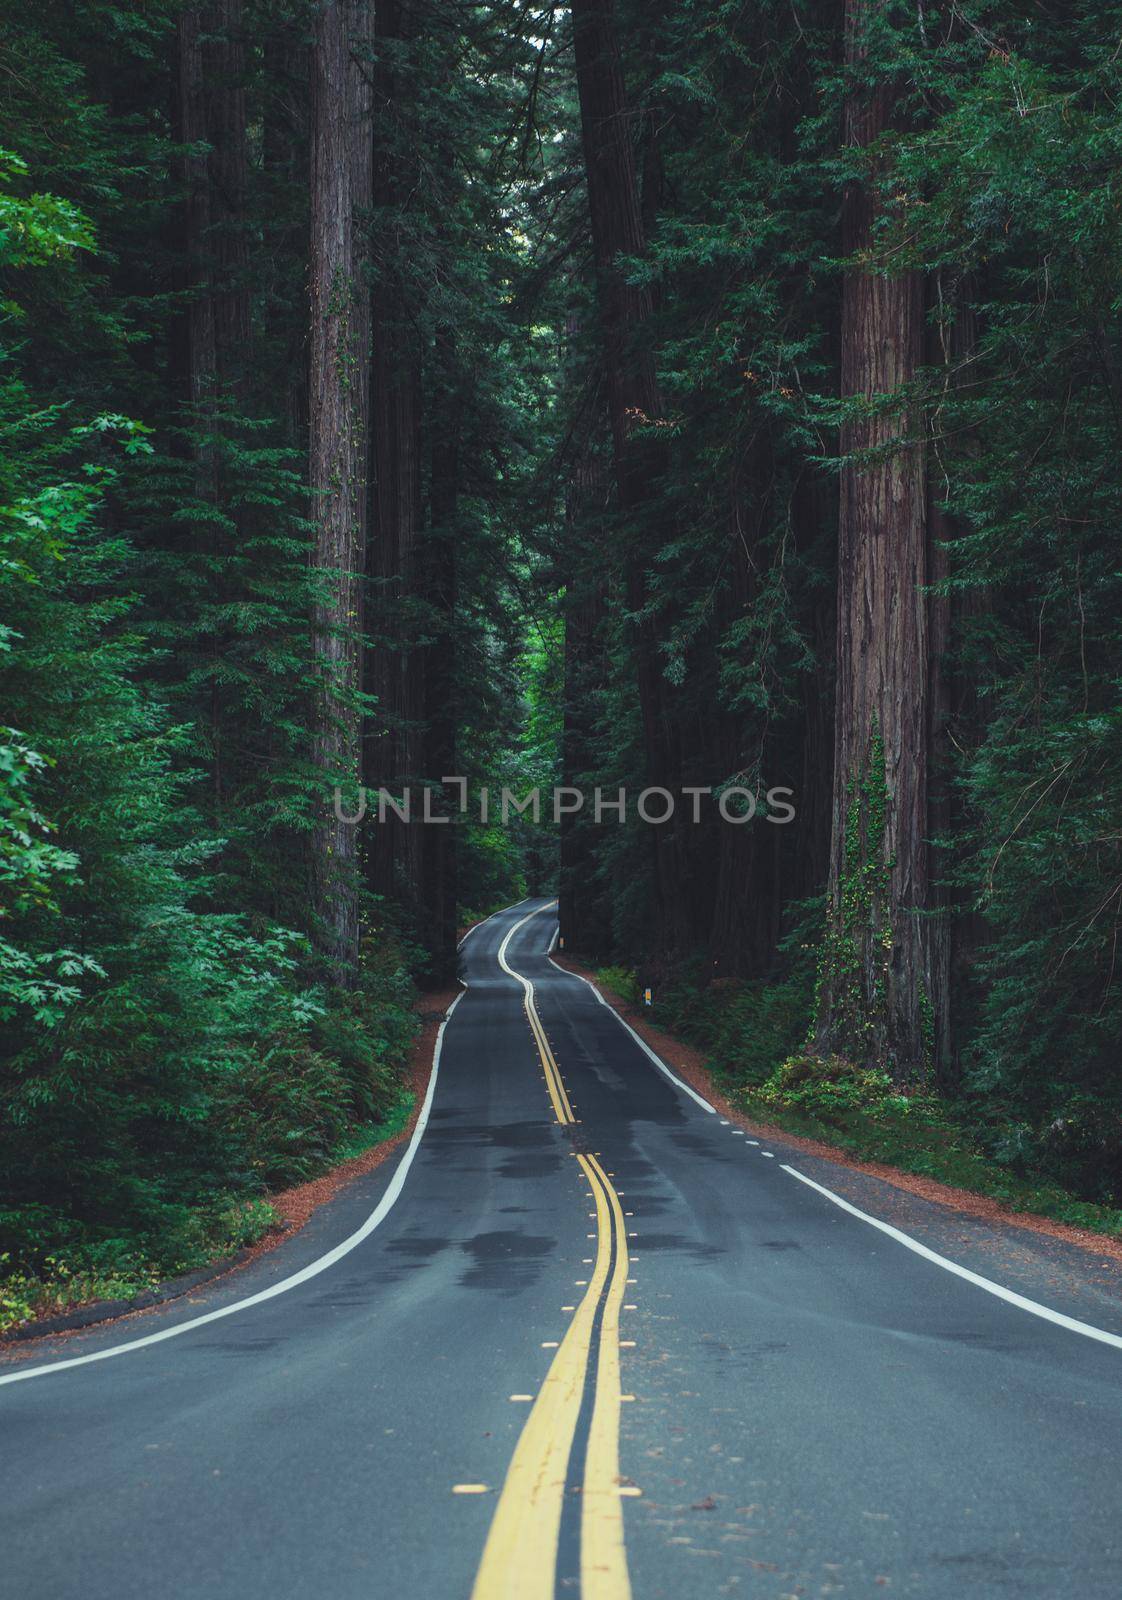 Famous California Redwood Highway Vertical Photo. Ancient Woodland. Eureka, CA United States of America.